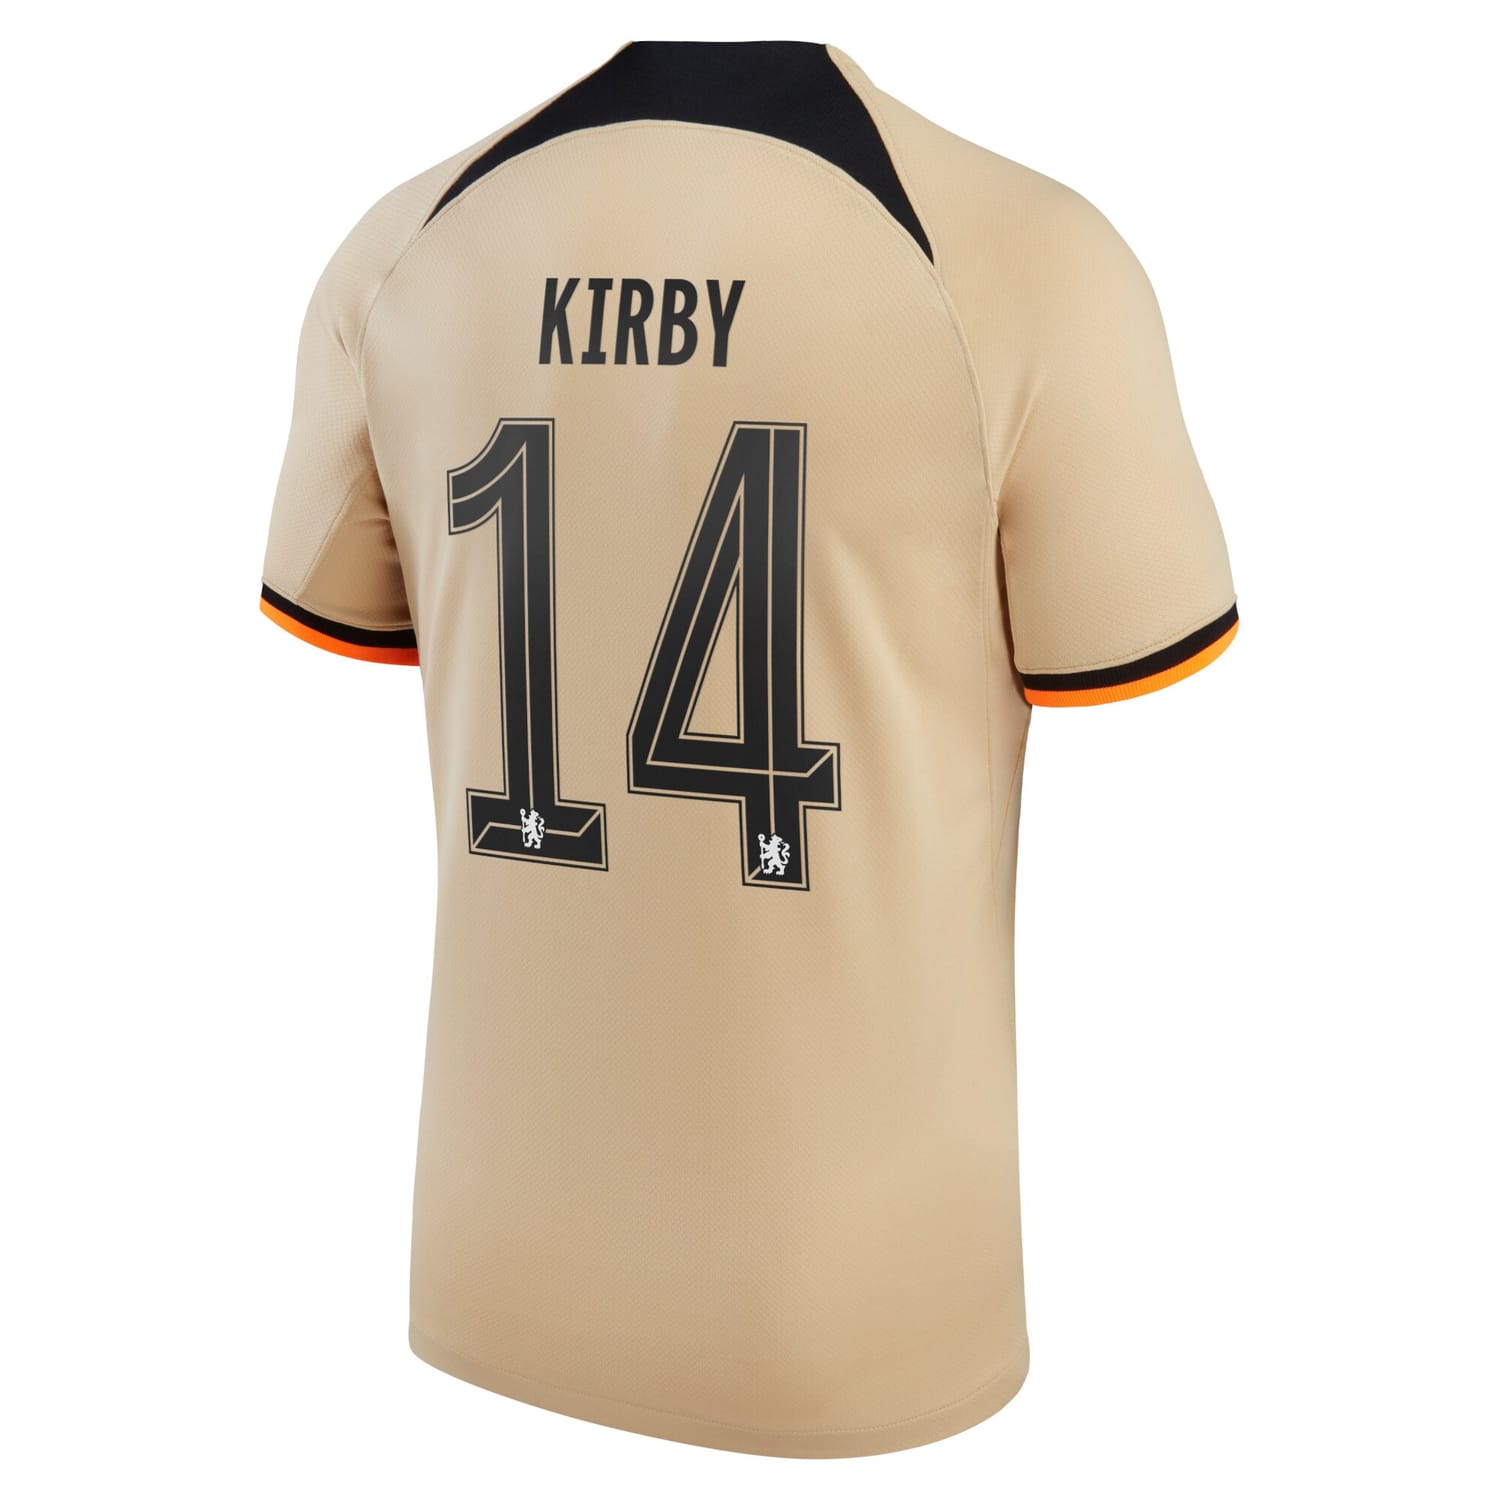 Premier League Chelsea Third Cup Jersey Shirt 2022-23 player Fran Kirby 14 printing for Men